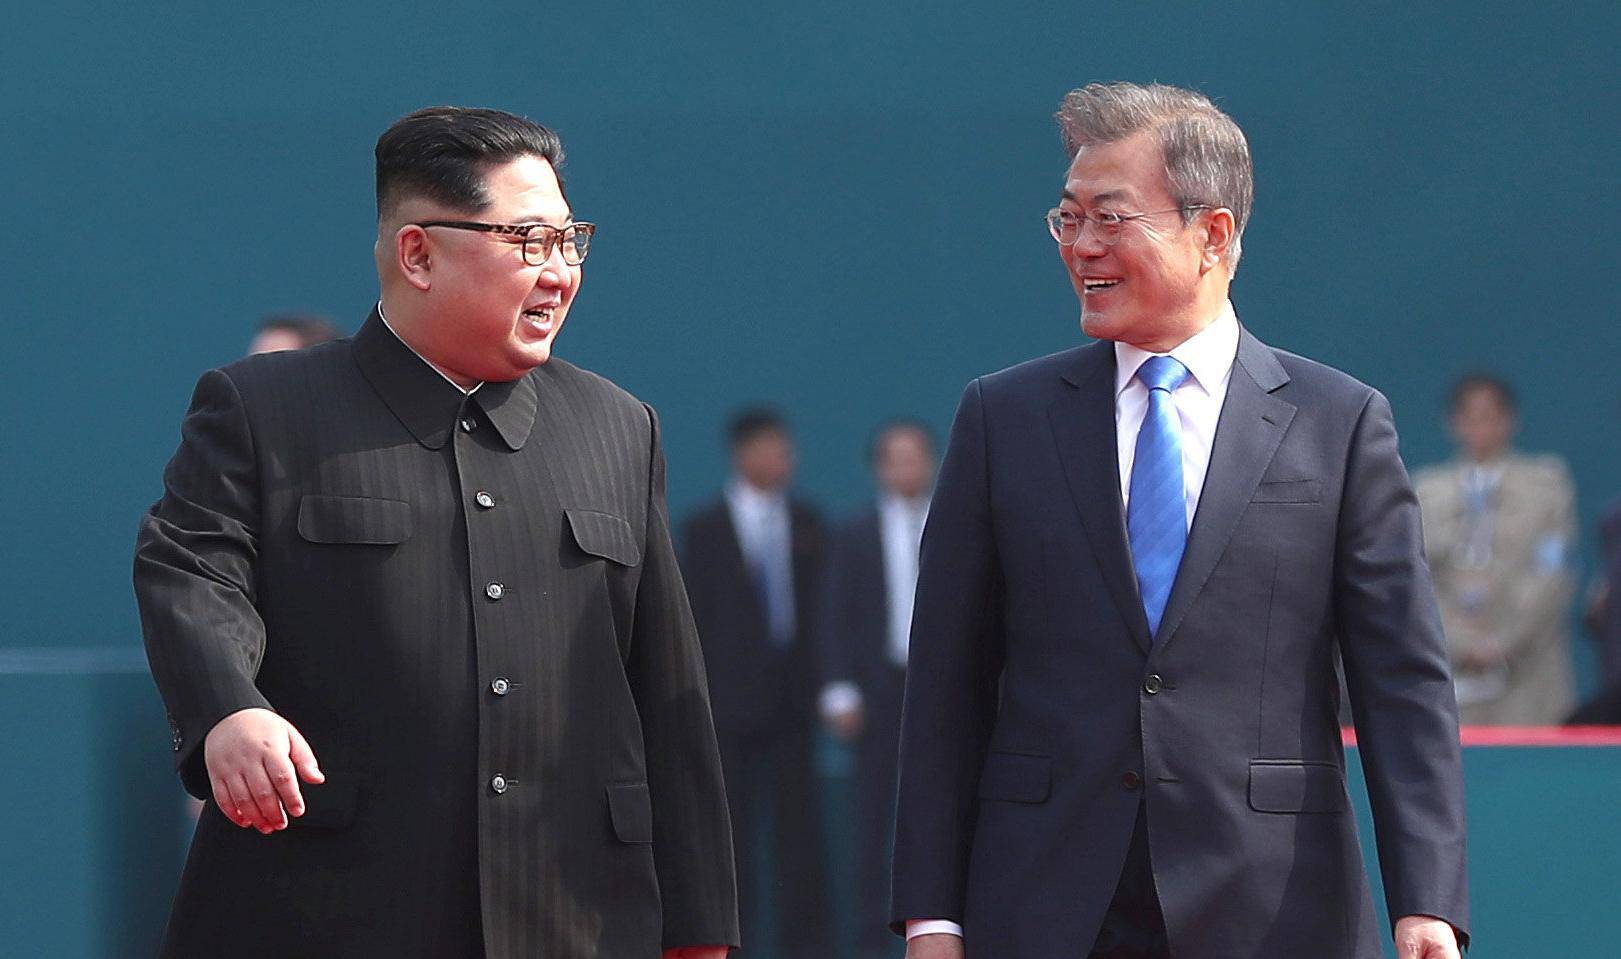 South Korean President Moon Jae-in walks with North Korean leader Kim Jong Un during their meeting at the truce village of Panmunjom